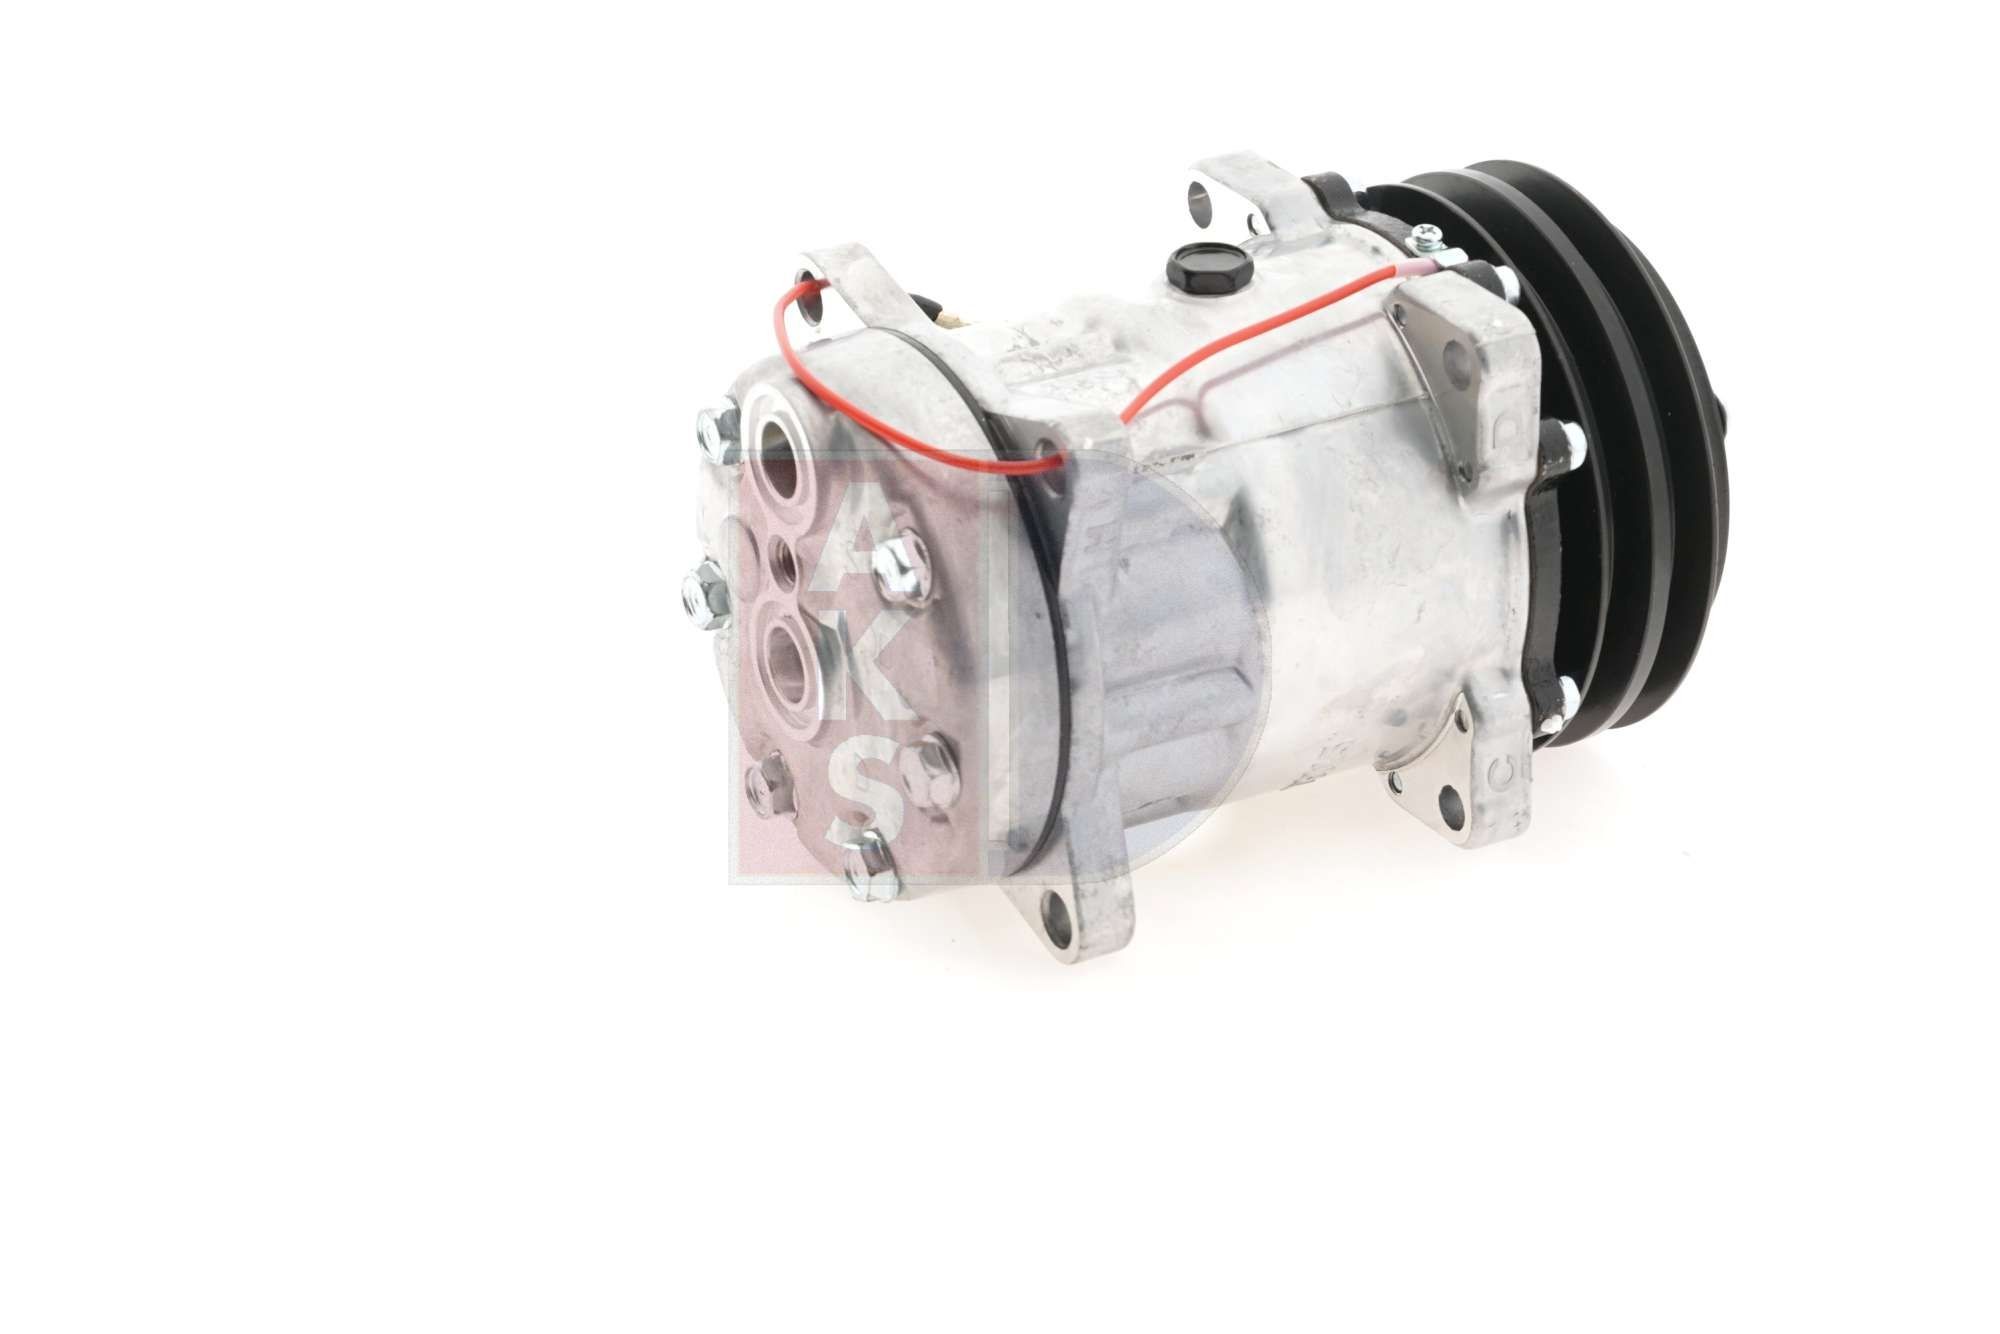 Air conditioning compressor 850625N from AKS DASIS